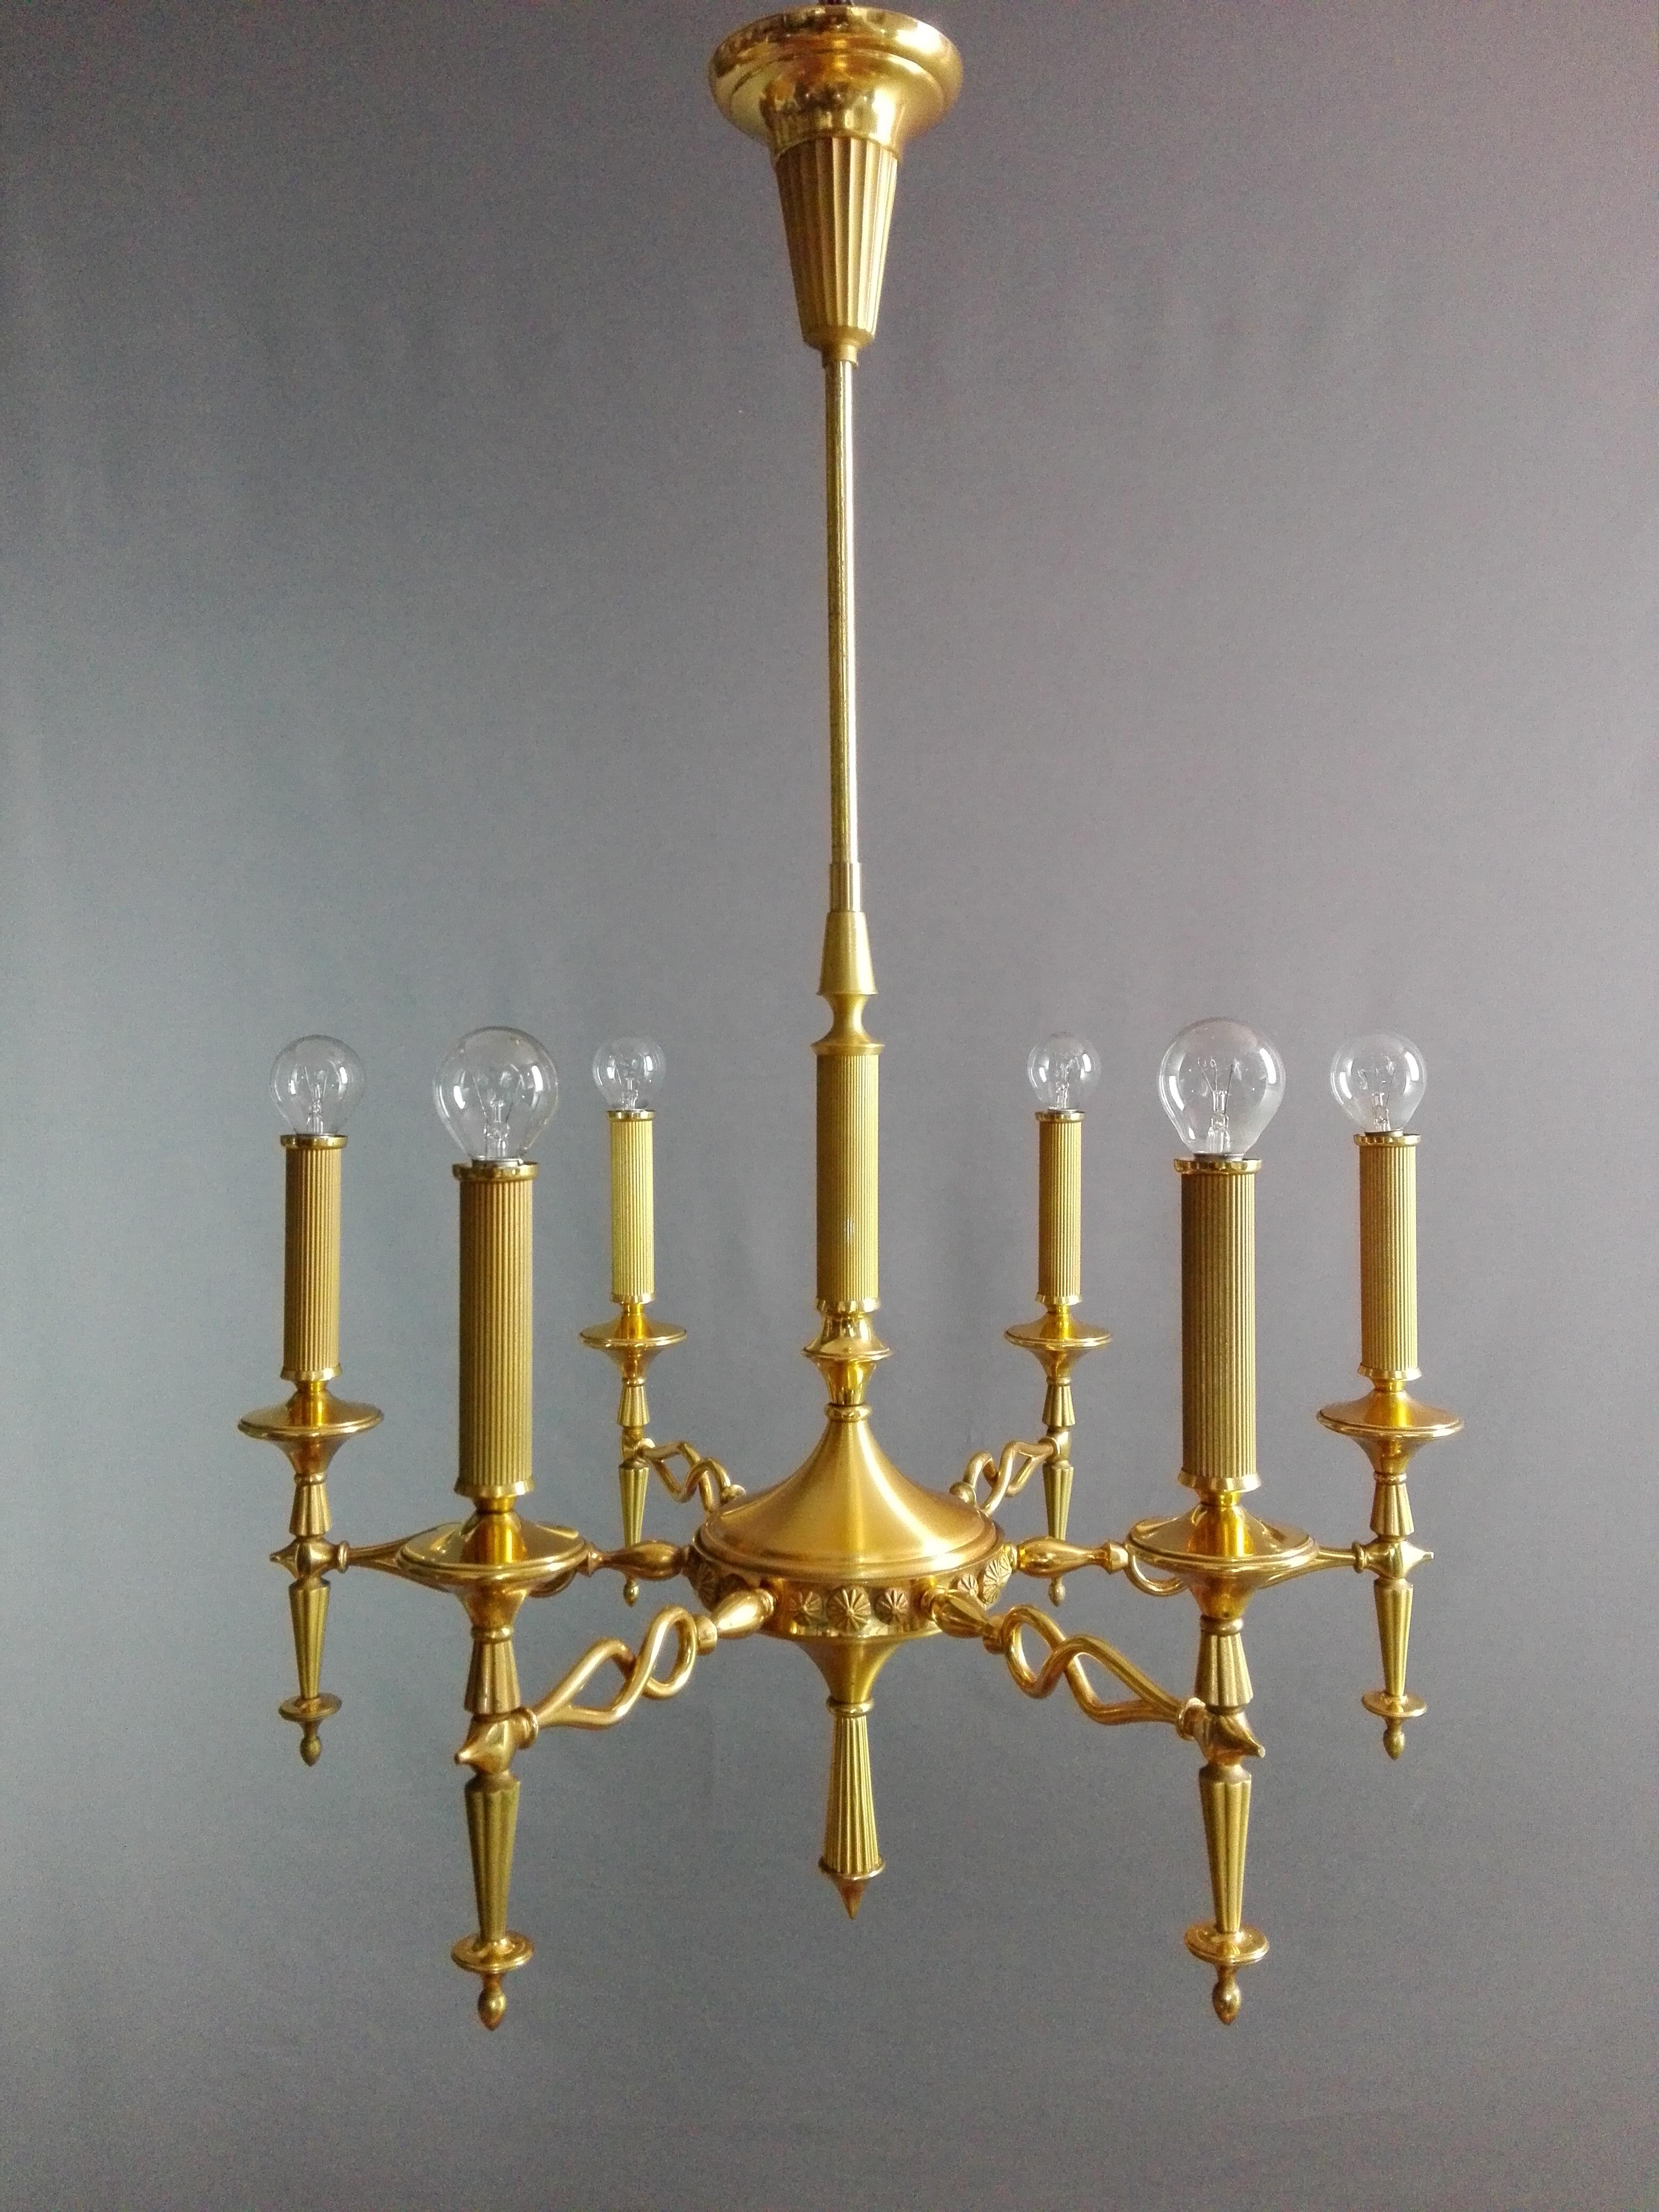 A splendid and refined 1950s Oscar Torlasco attributable six-light chandelier for Lumi Milano, Italy, in gilded solid brass, made and finished to a very high standard! 
Works both 110-240 volts.
Stunning and absolutely rare the classic shape of its